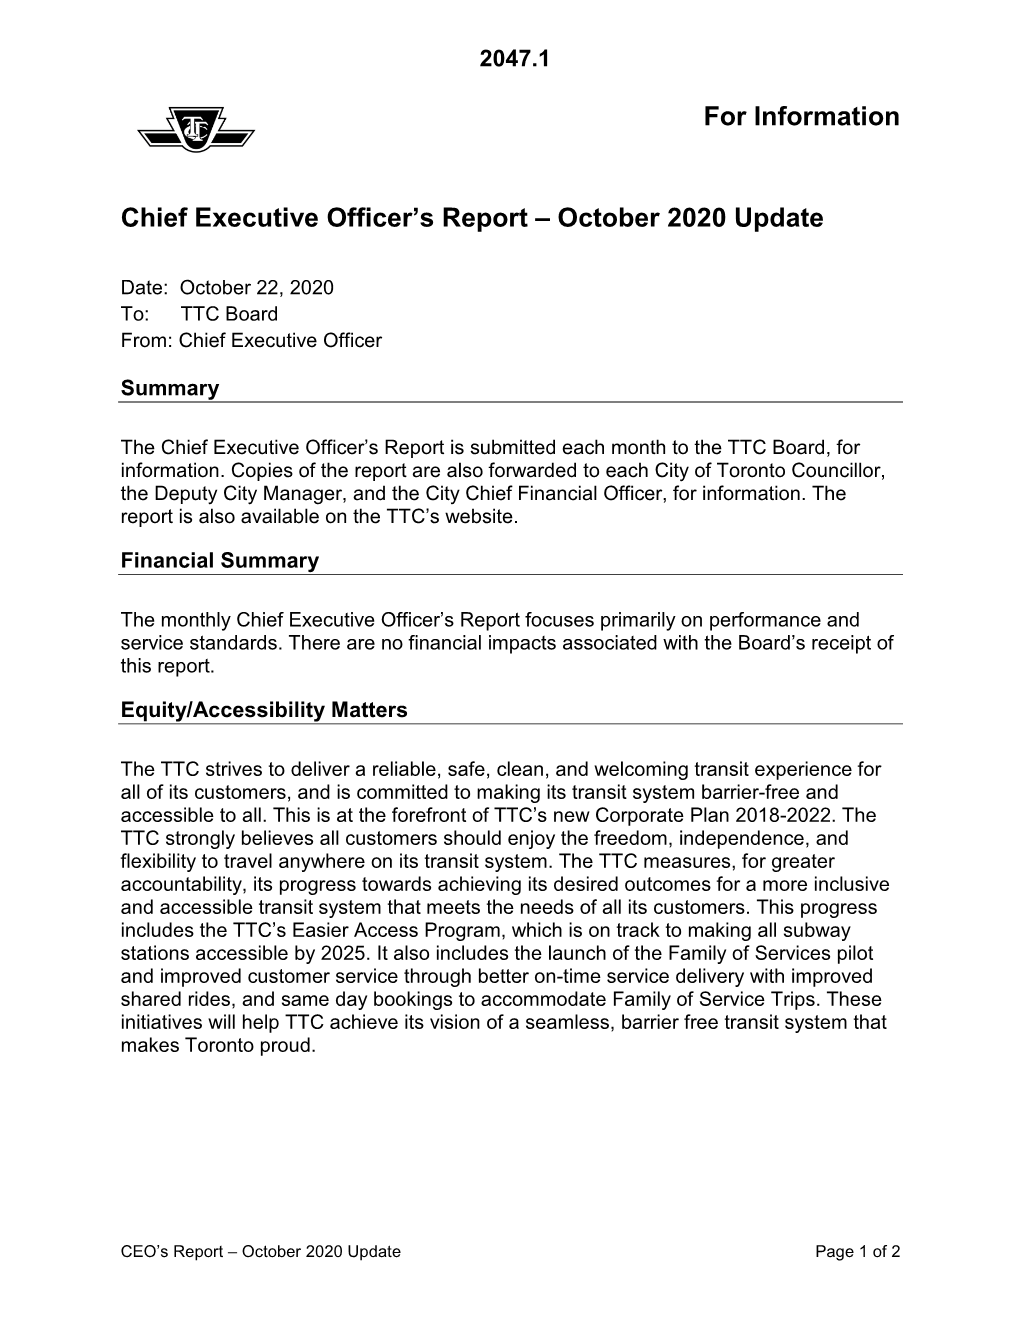 For Information Chief Executive Officer's Report – October